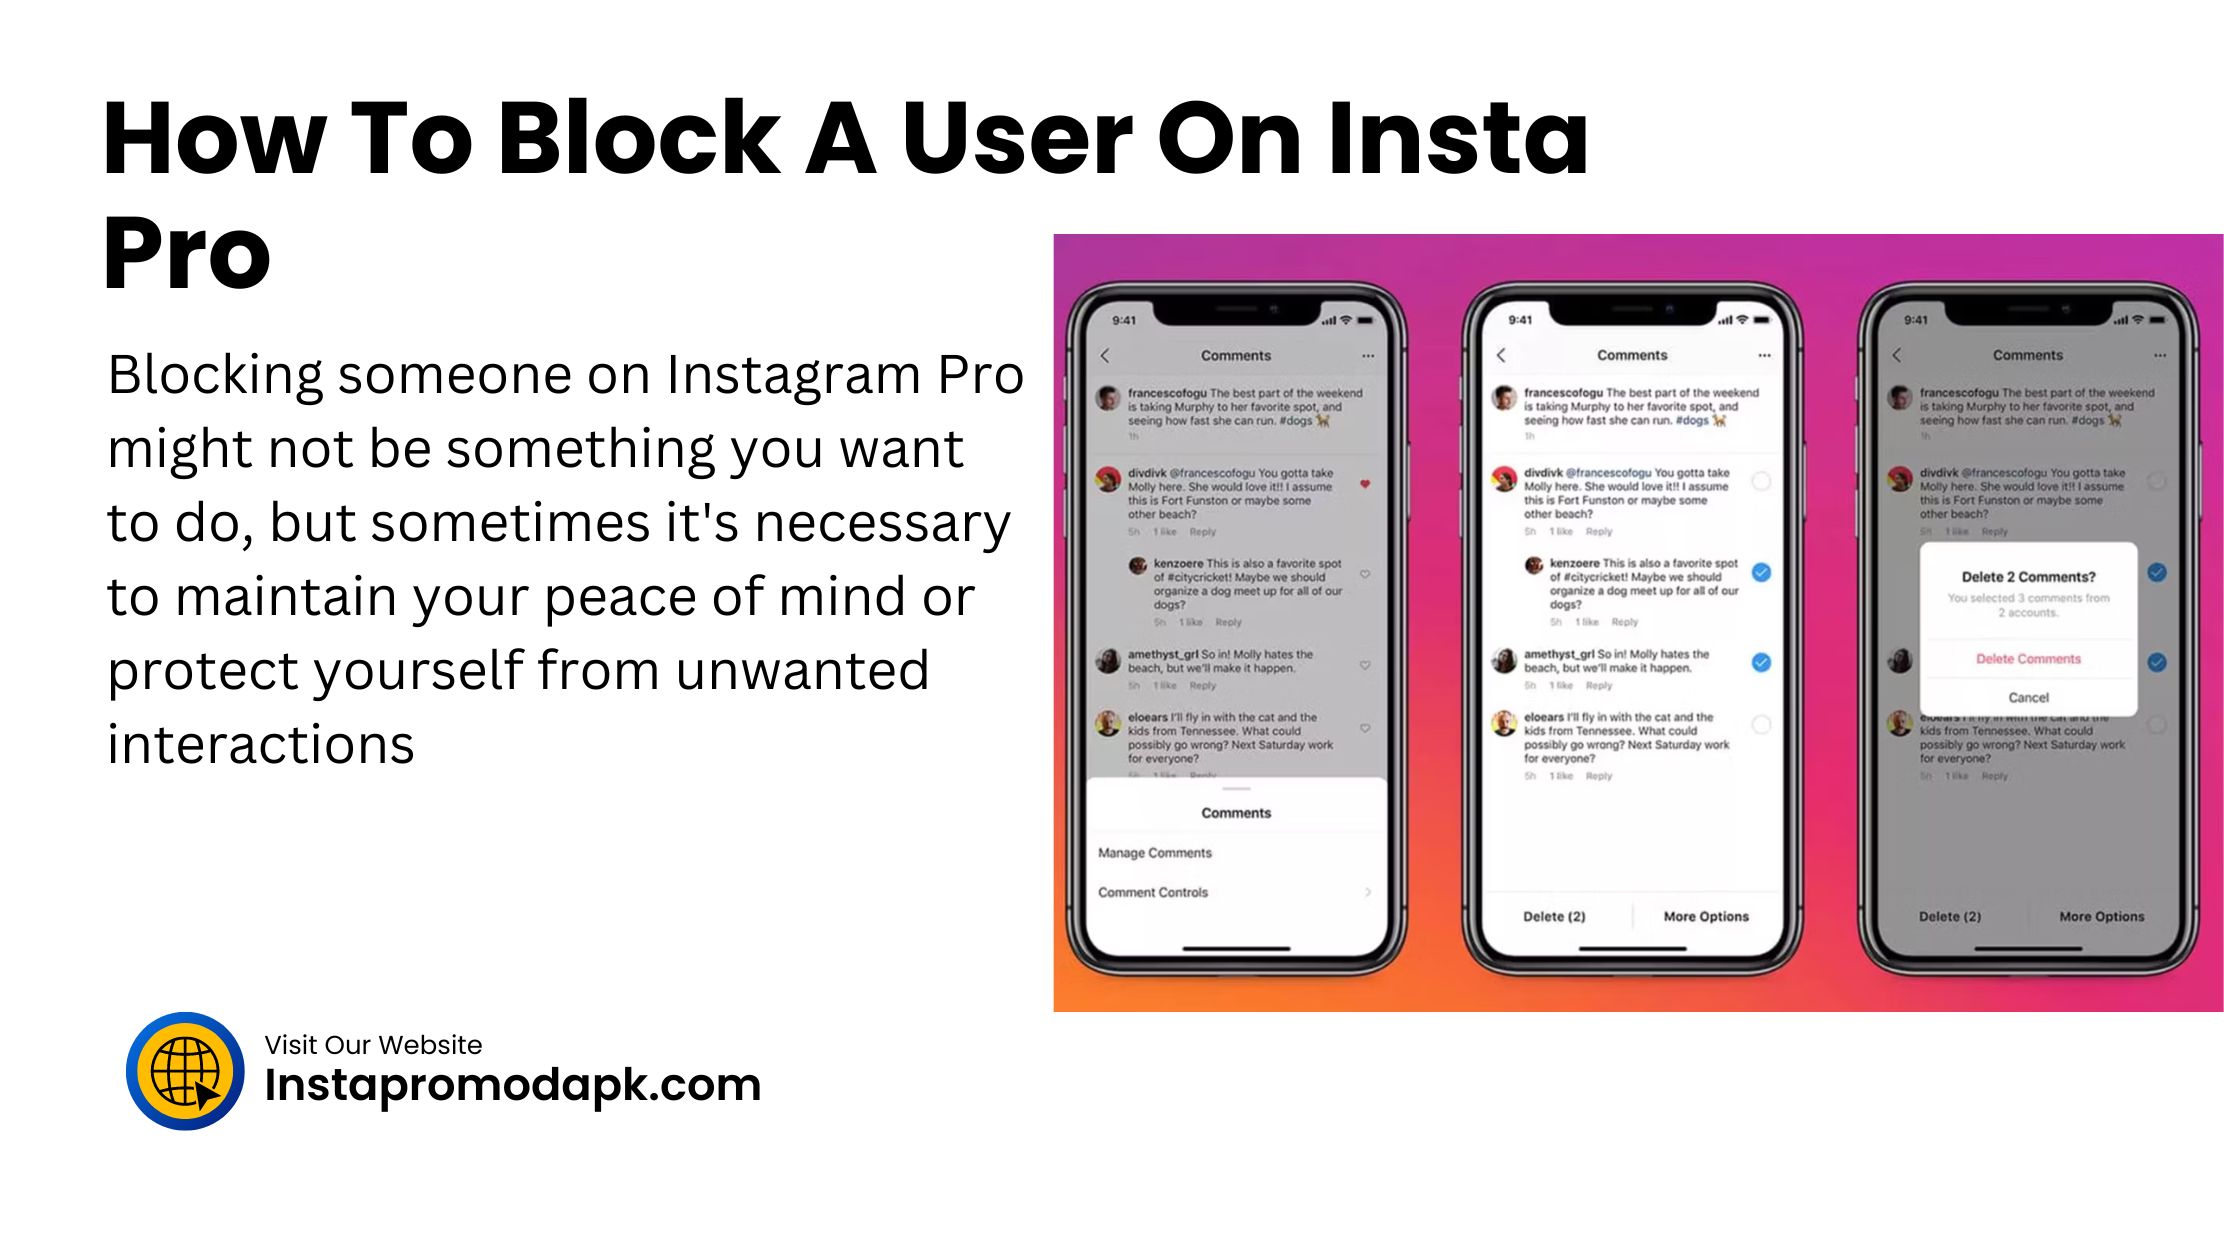 How To Block A User On Insta Pro